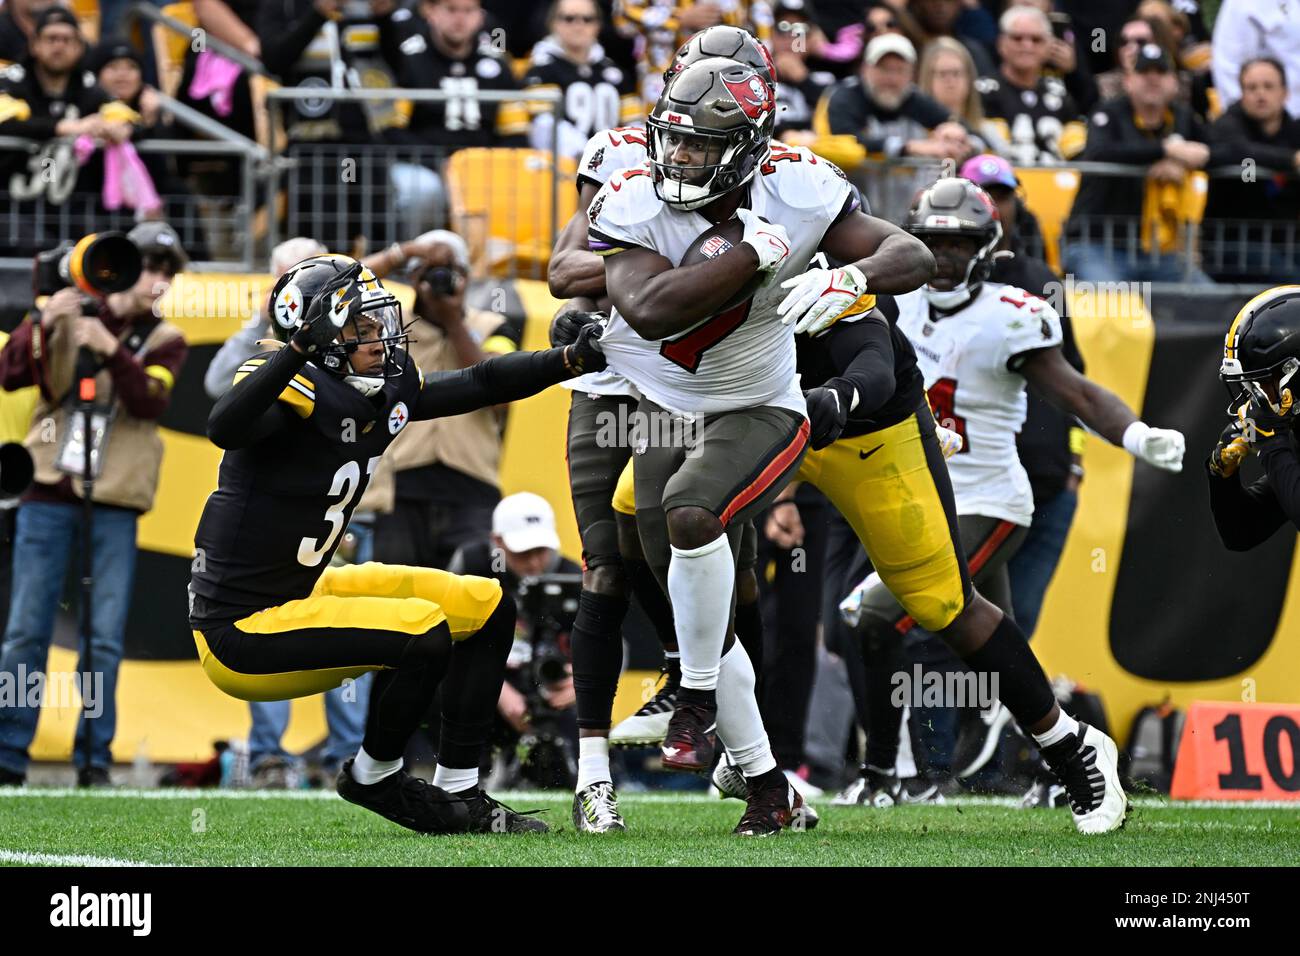 PITTSBURGH, PA - OCTOBER 16: Tampa Bay Buccaneers running back Leonard  Fournette (7) avoids a tackle by Pittsburgh Steelers cornerback Mark  Gilbert (31) before making an 11 yard touchdown in the fourth